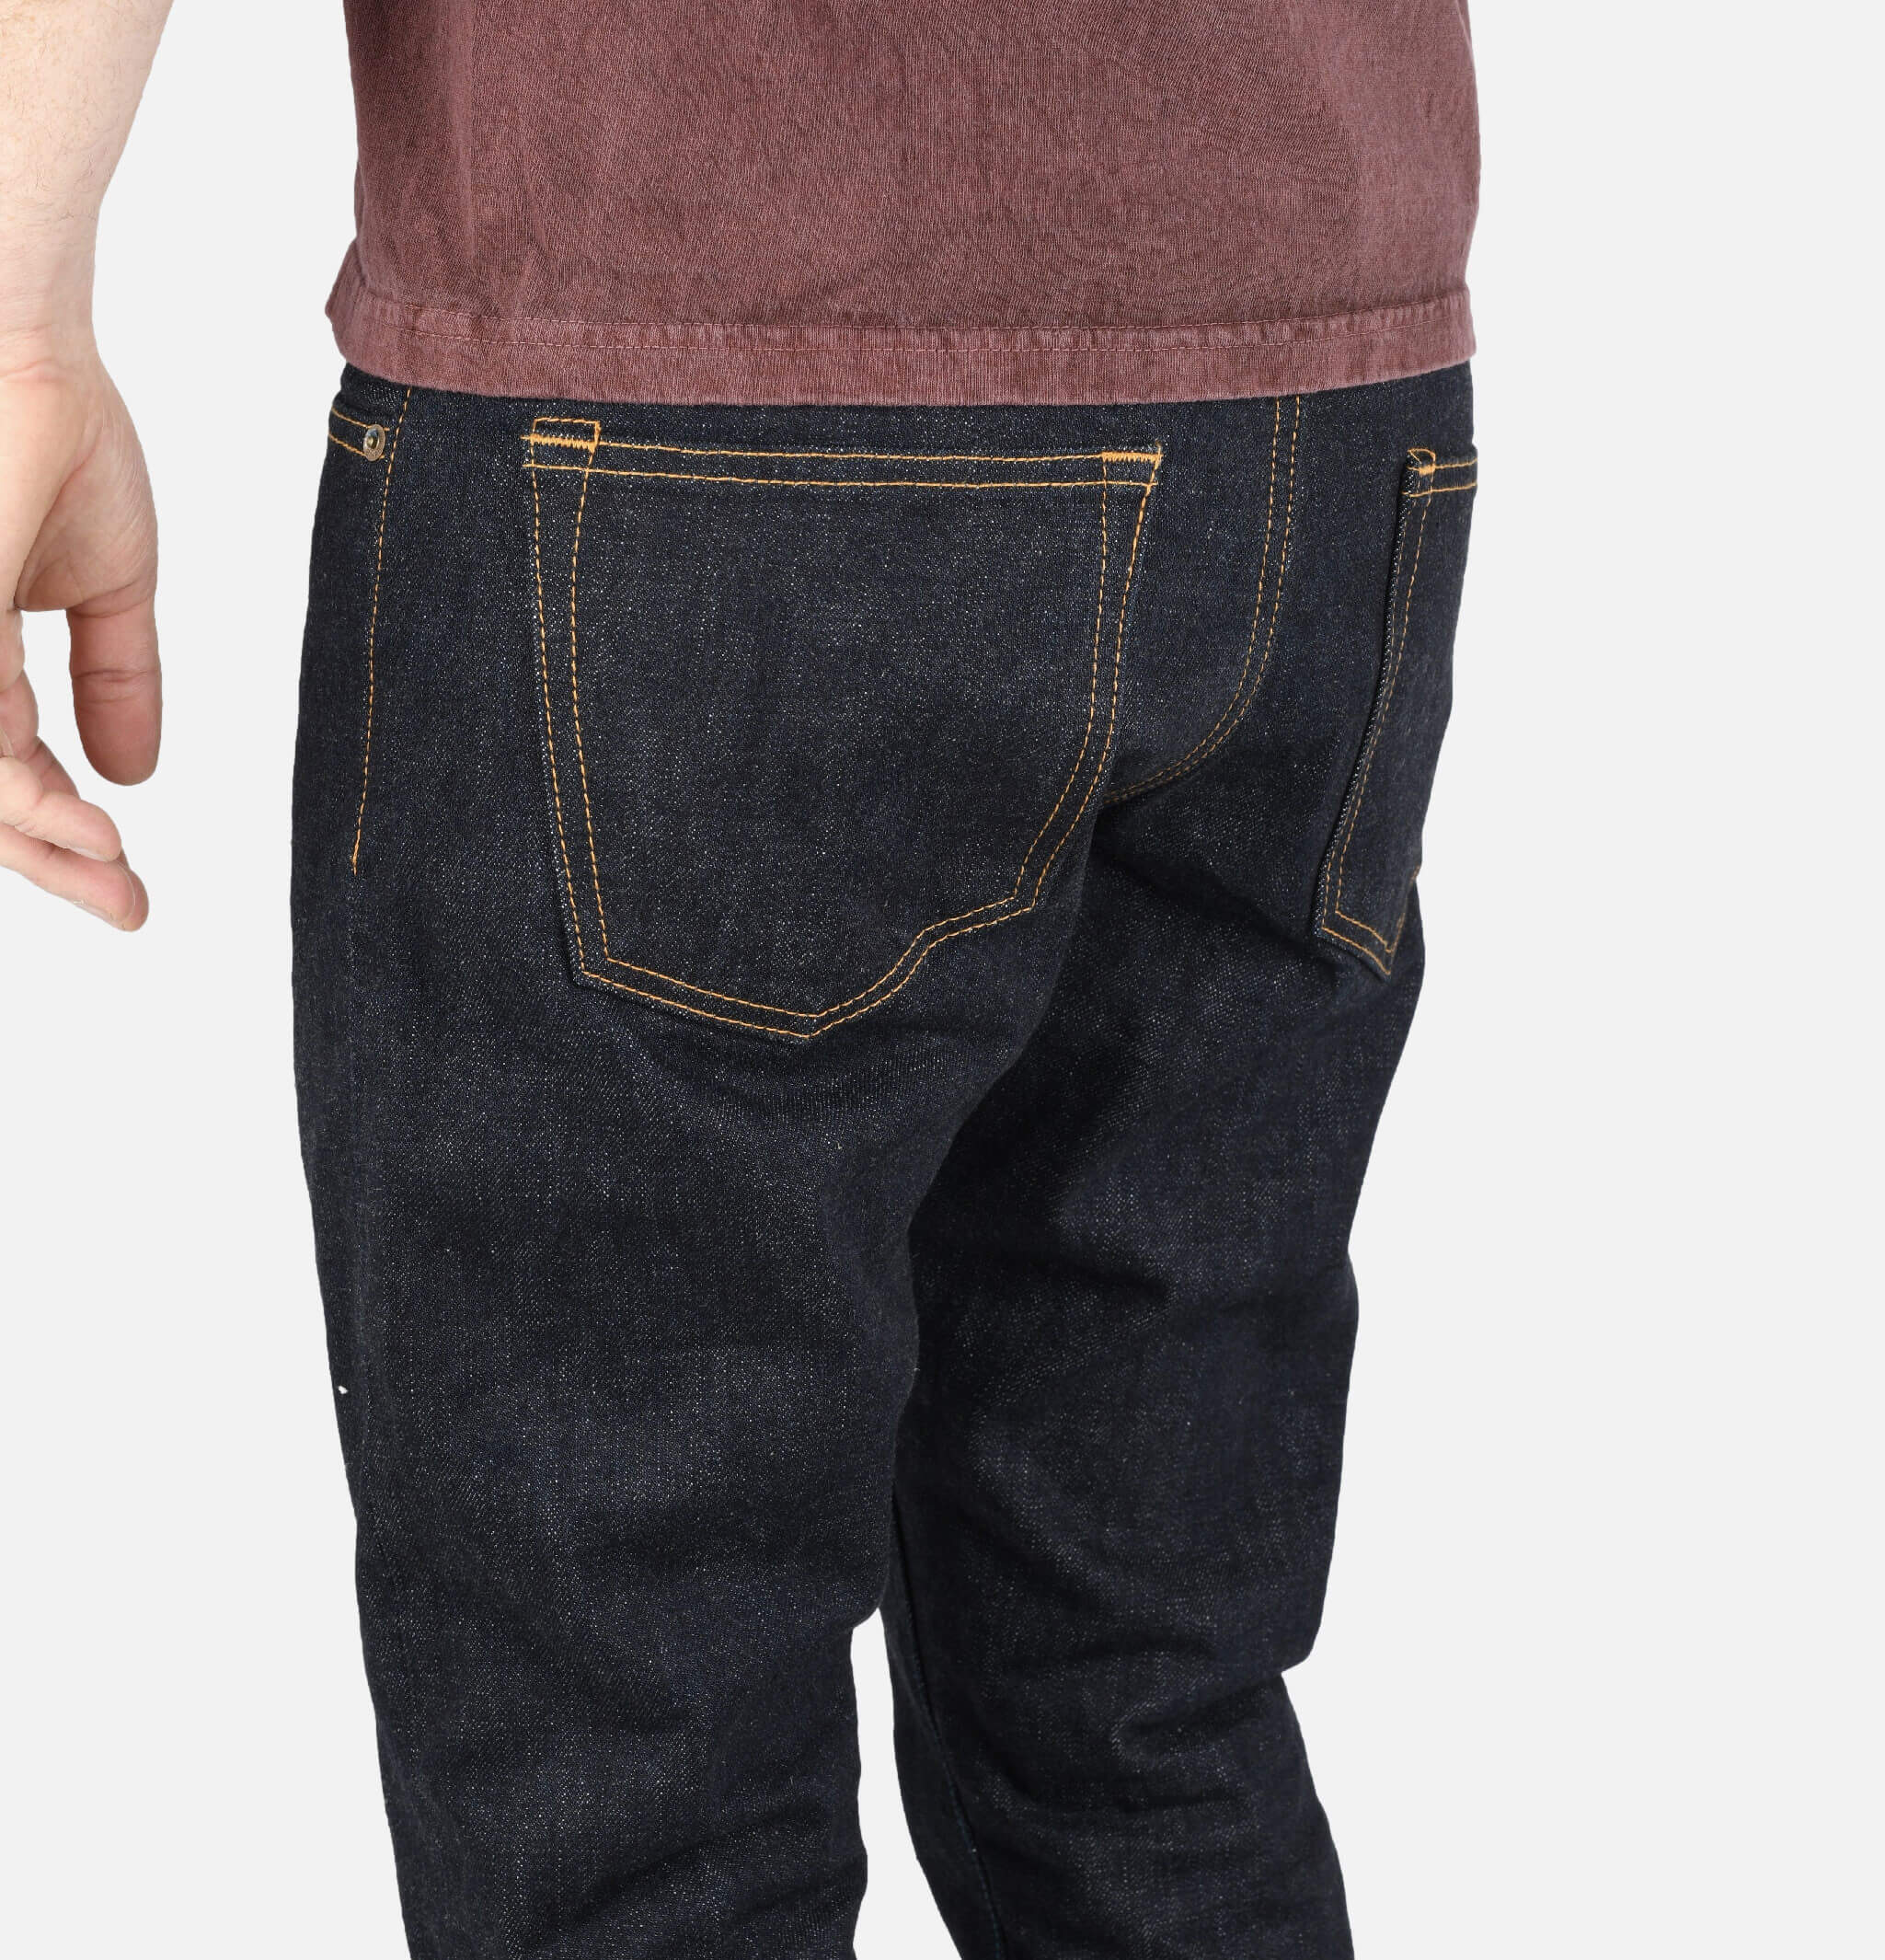 201 Tapered Jeans14.8 US Selvage